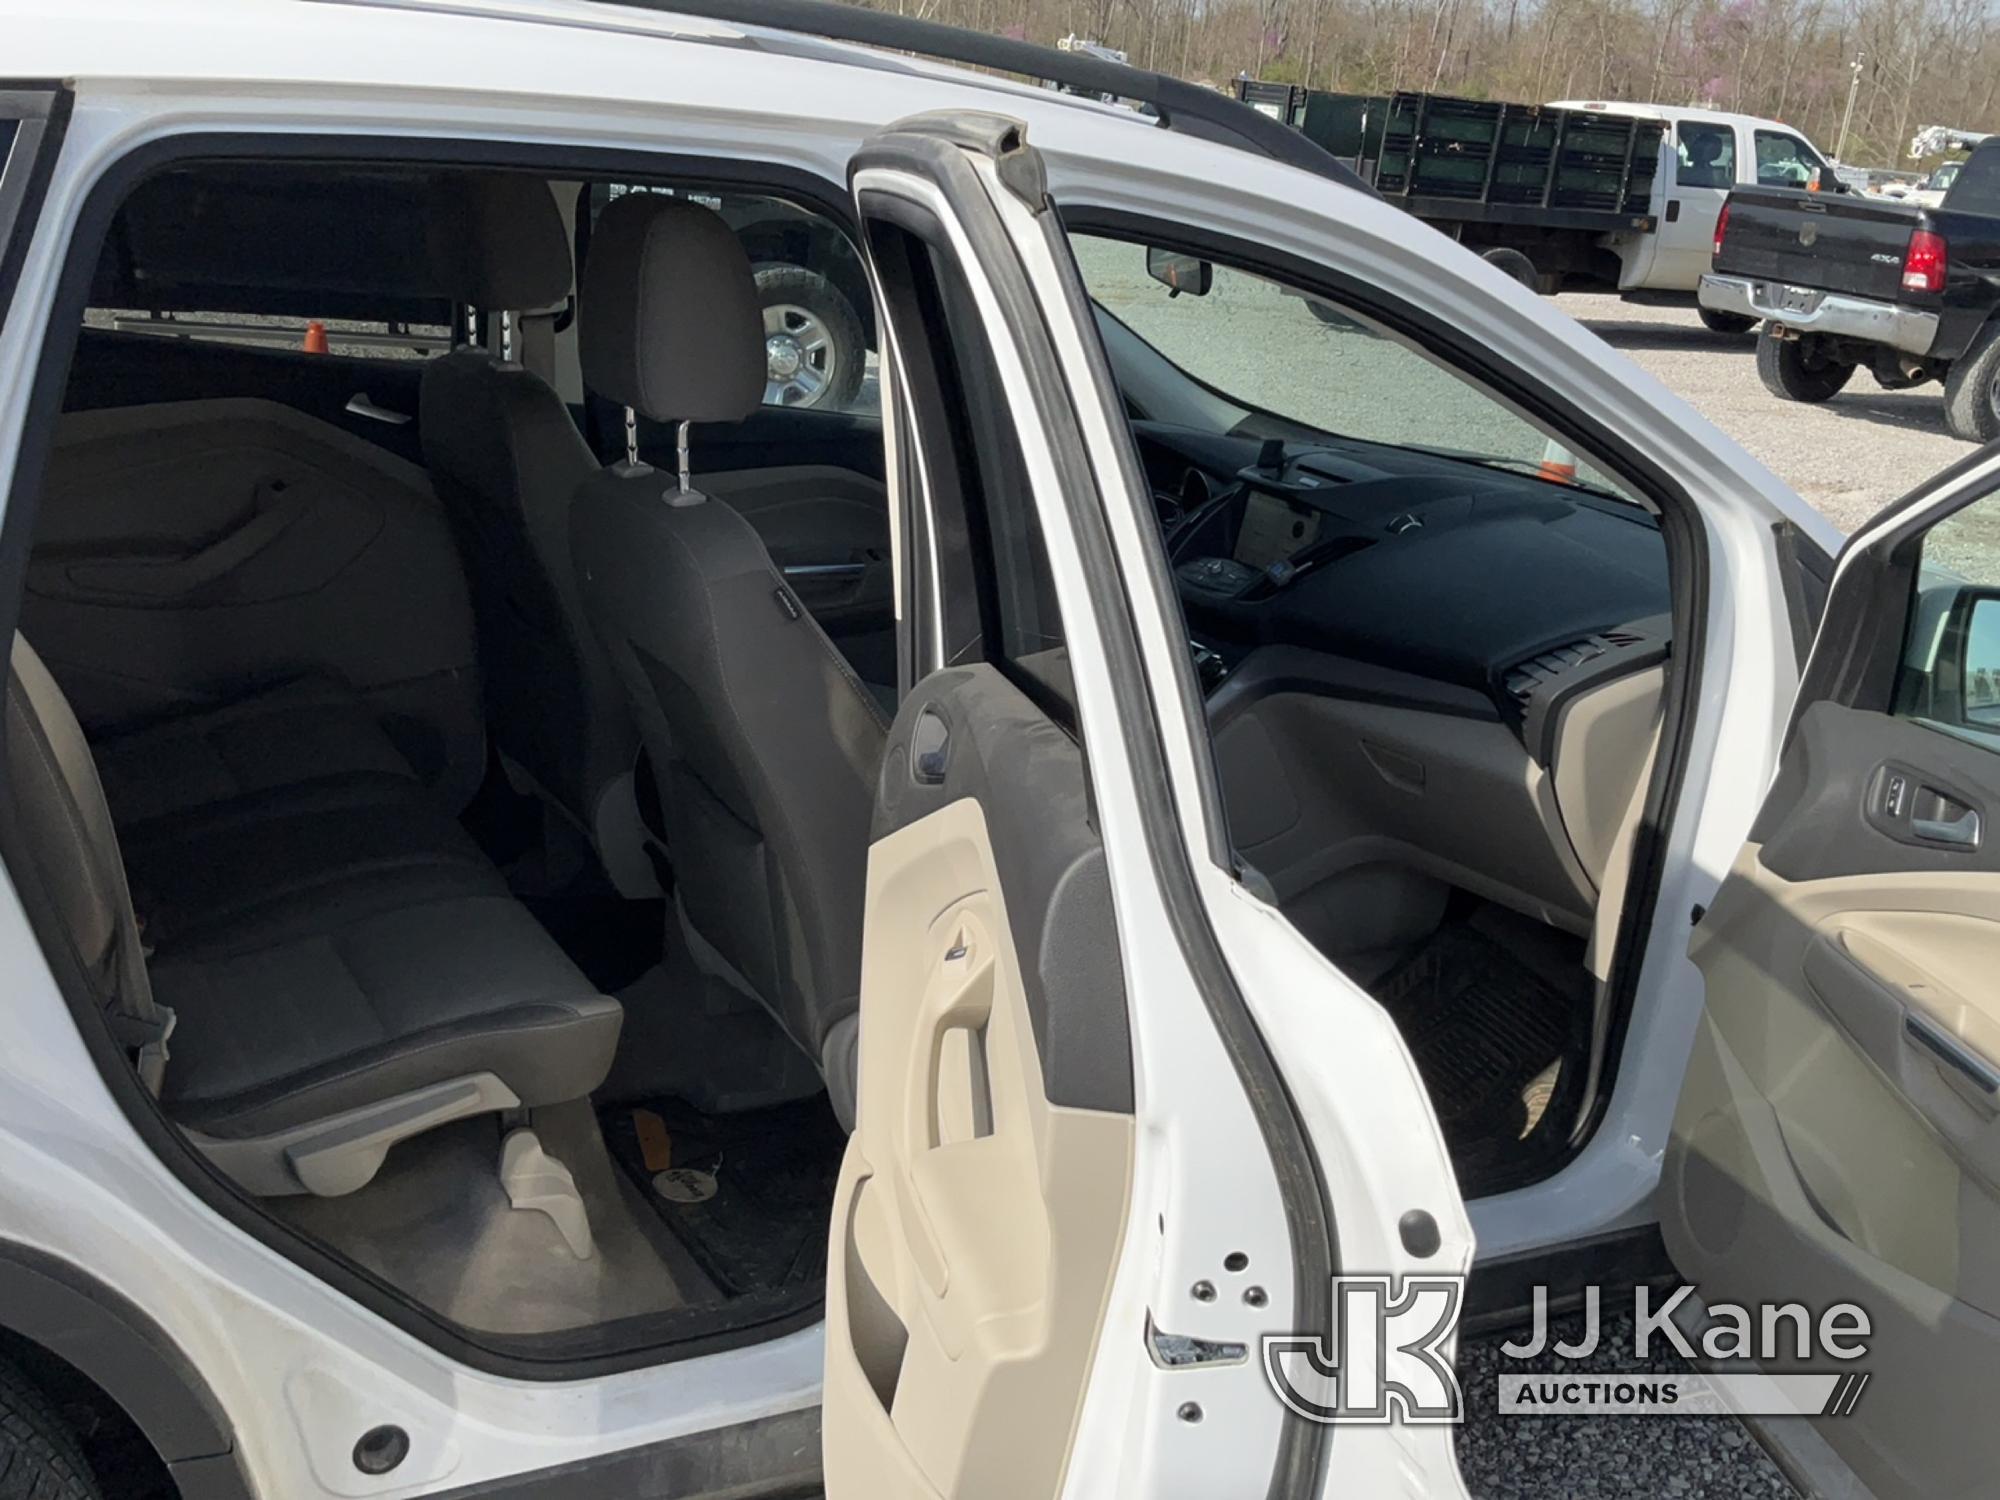 (Verona, KY) 2016 Ford Escape 4x4 4-Door Sport Utility Vehicle Runs & Moves) (Check Engine Light On)